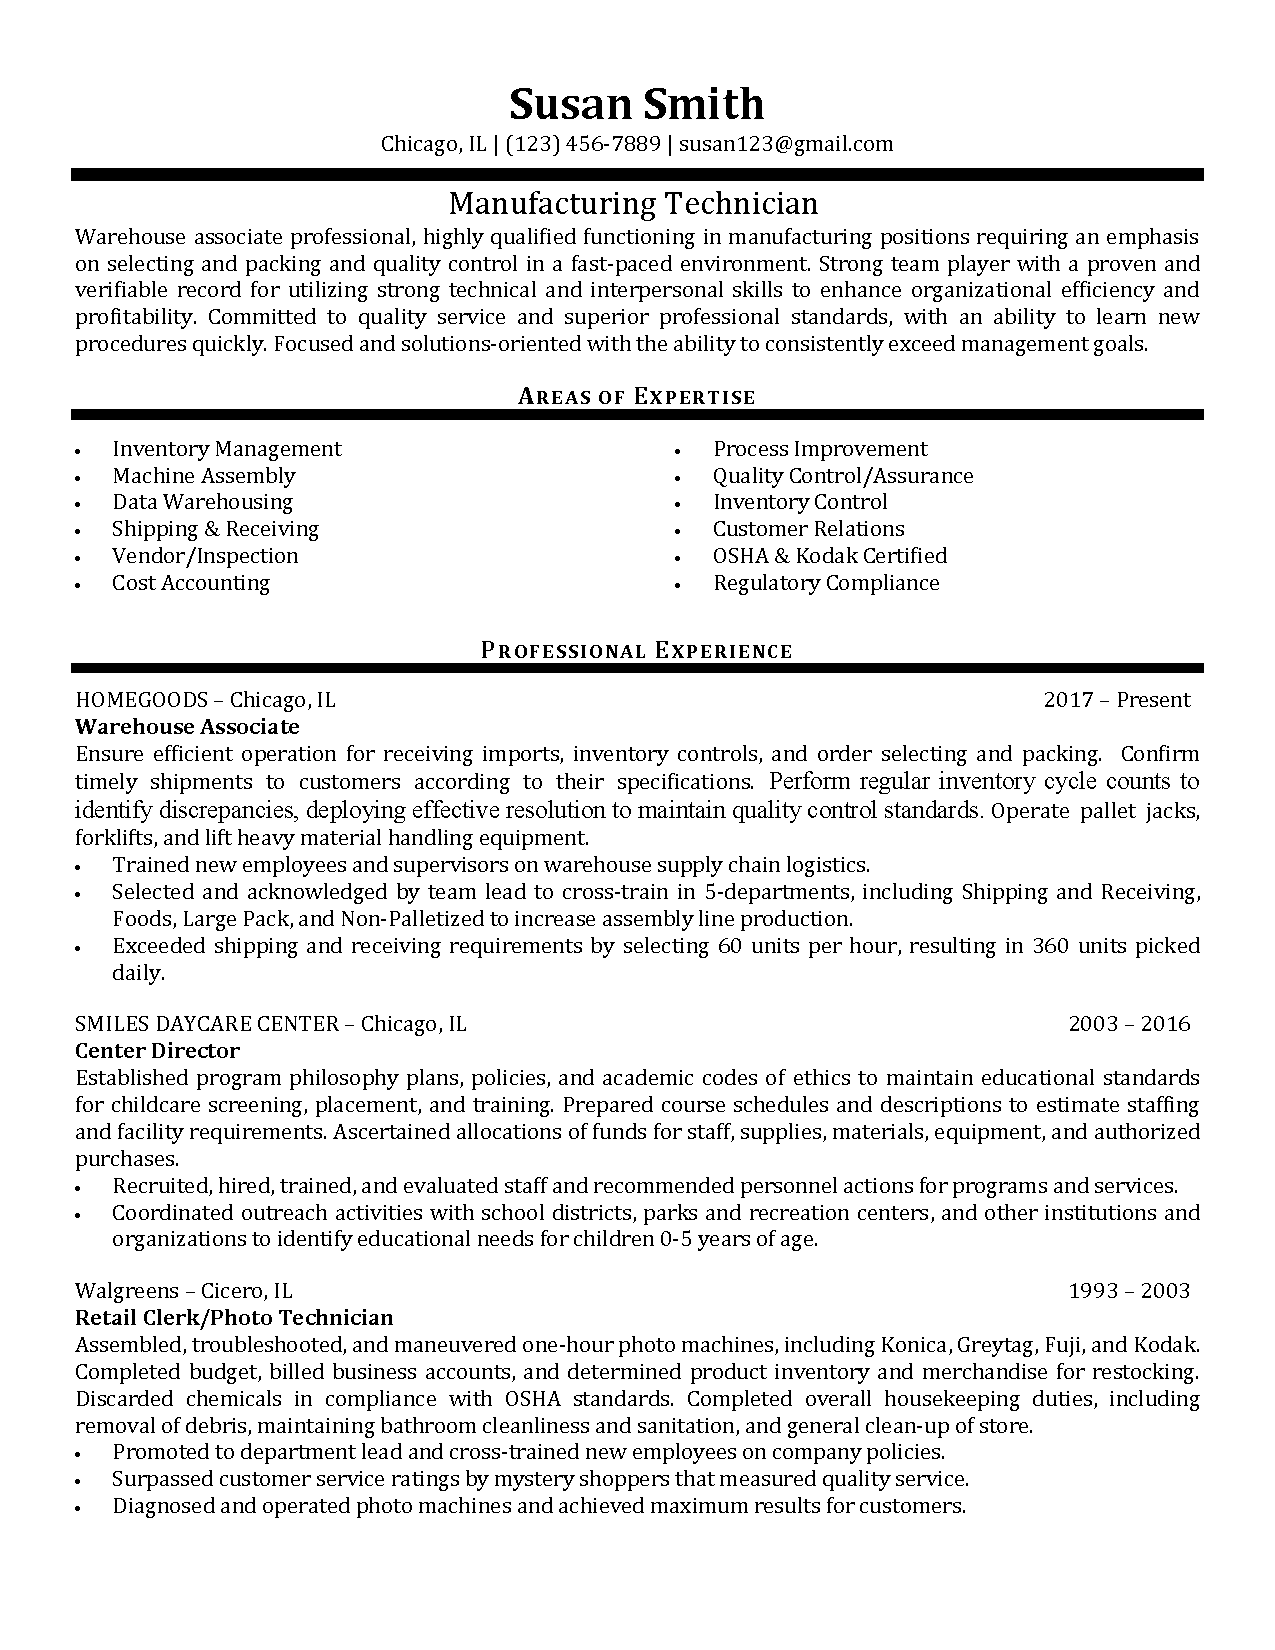 00004 manufacturing technician resume example